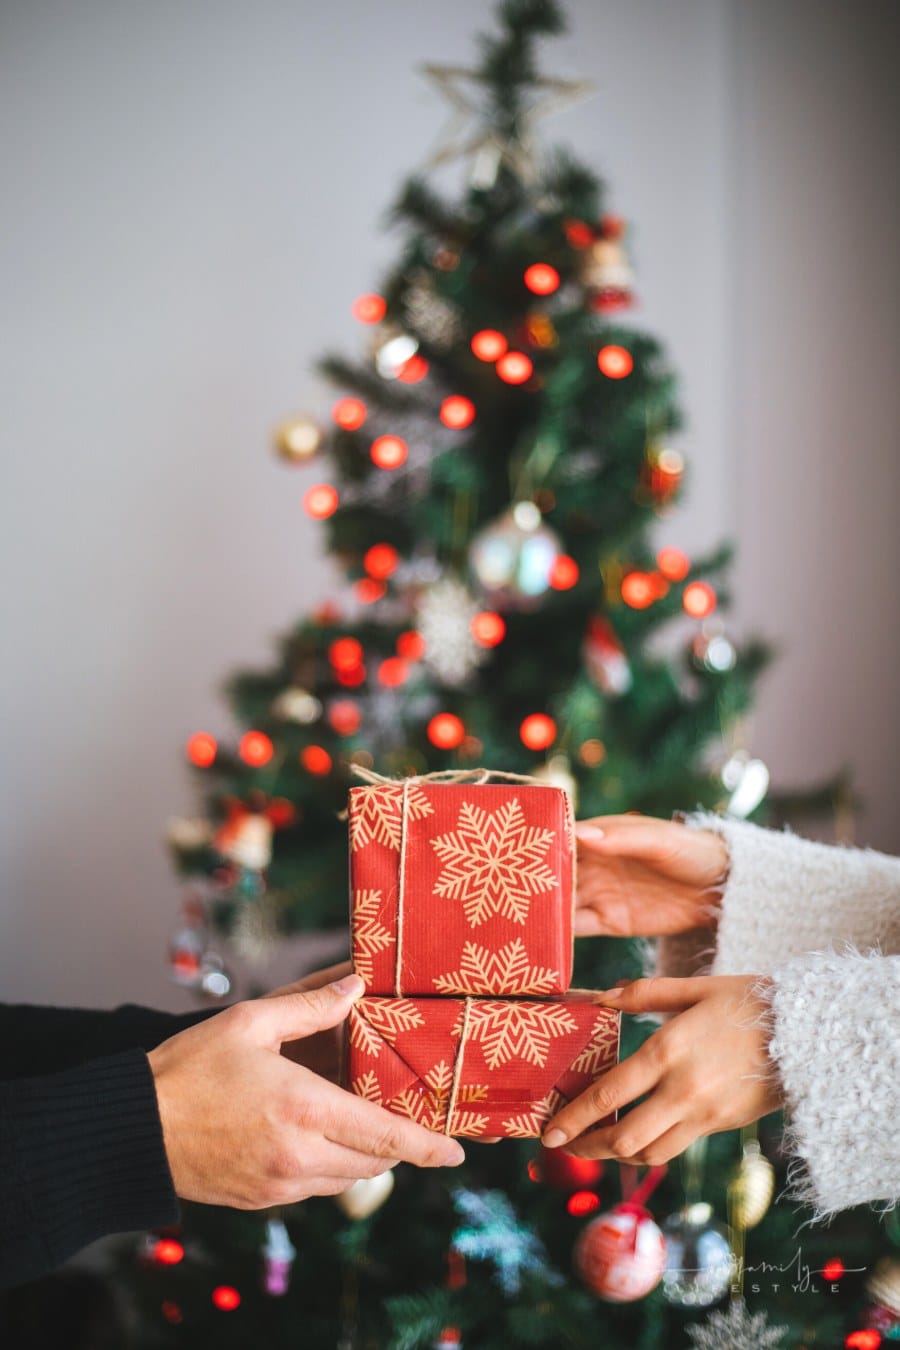 man and woman's hands exchanging gifts in front of a Christmas tree